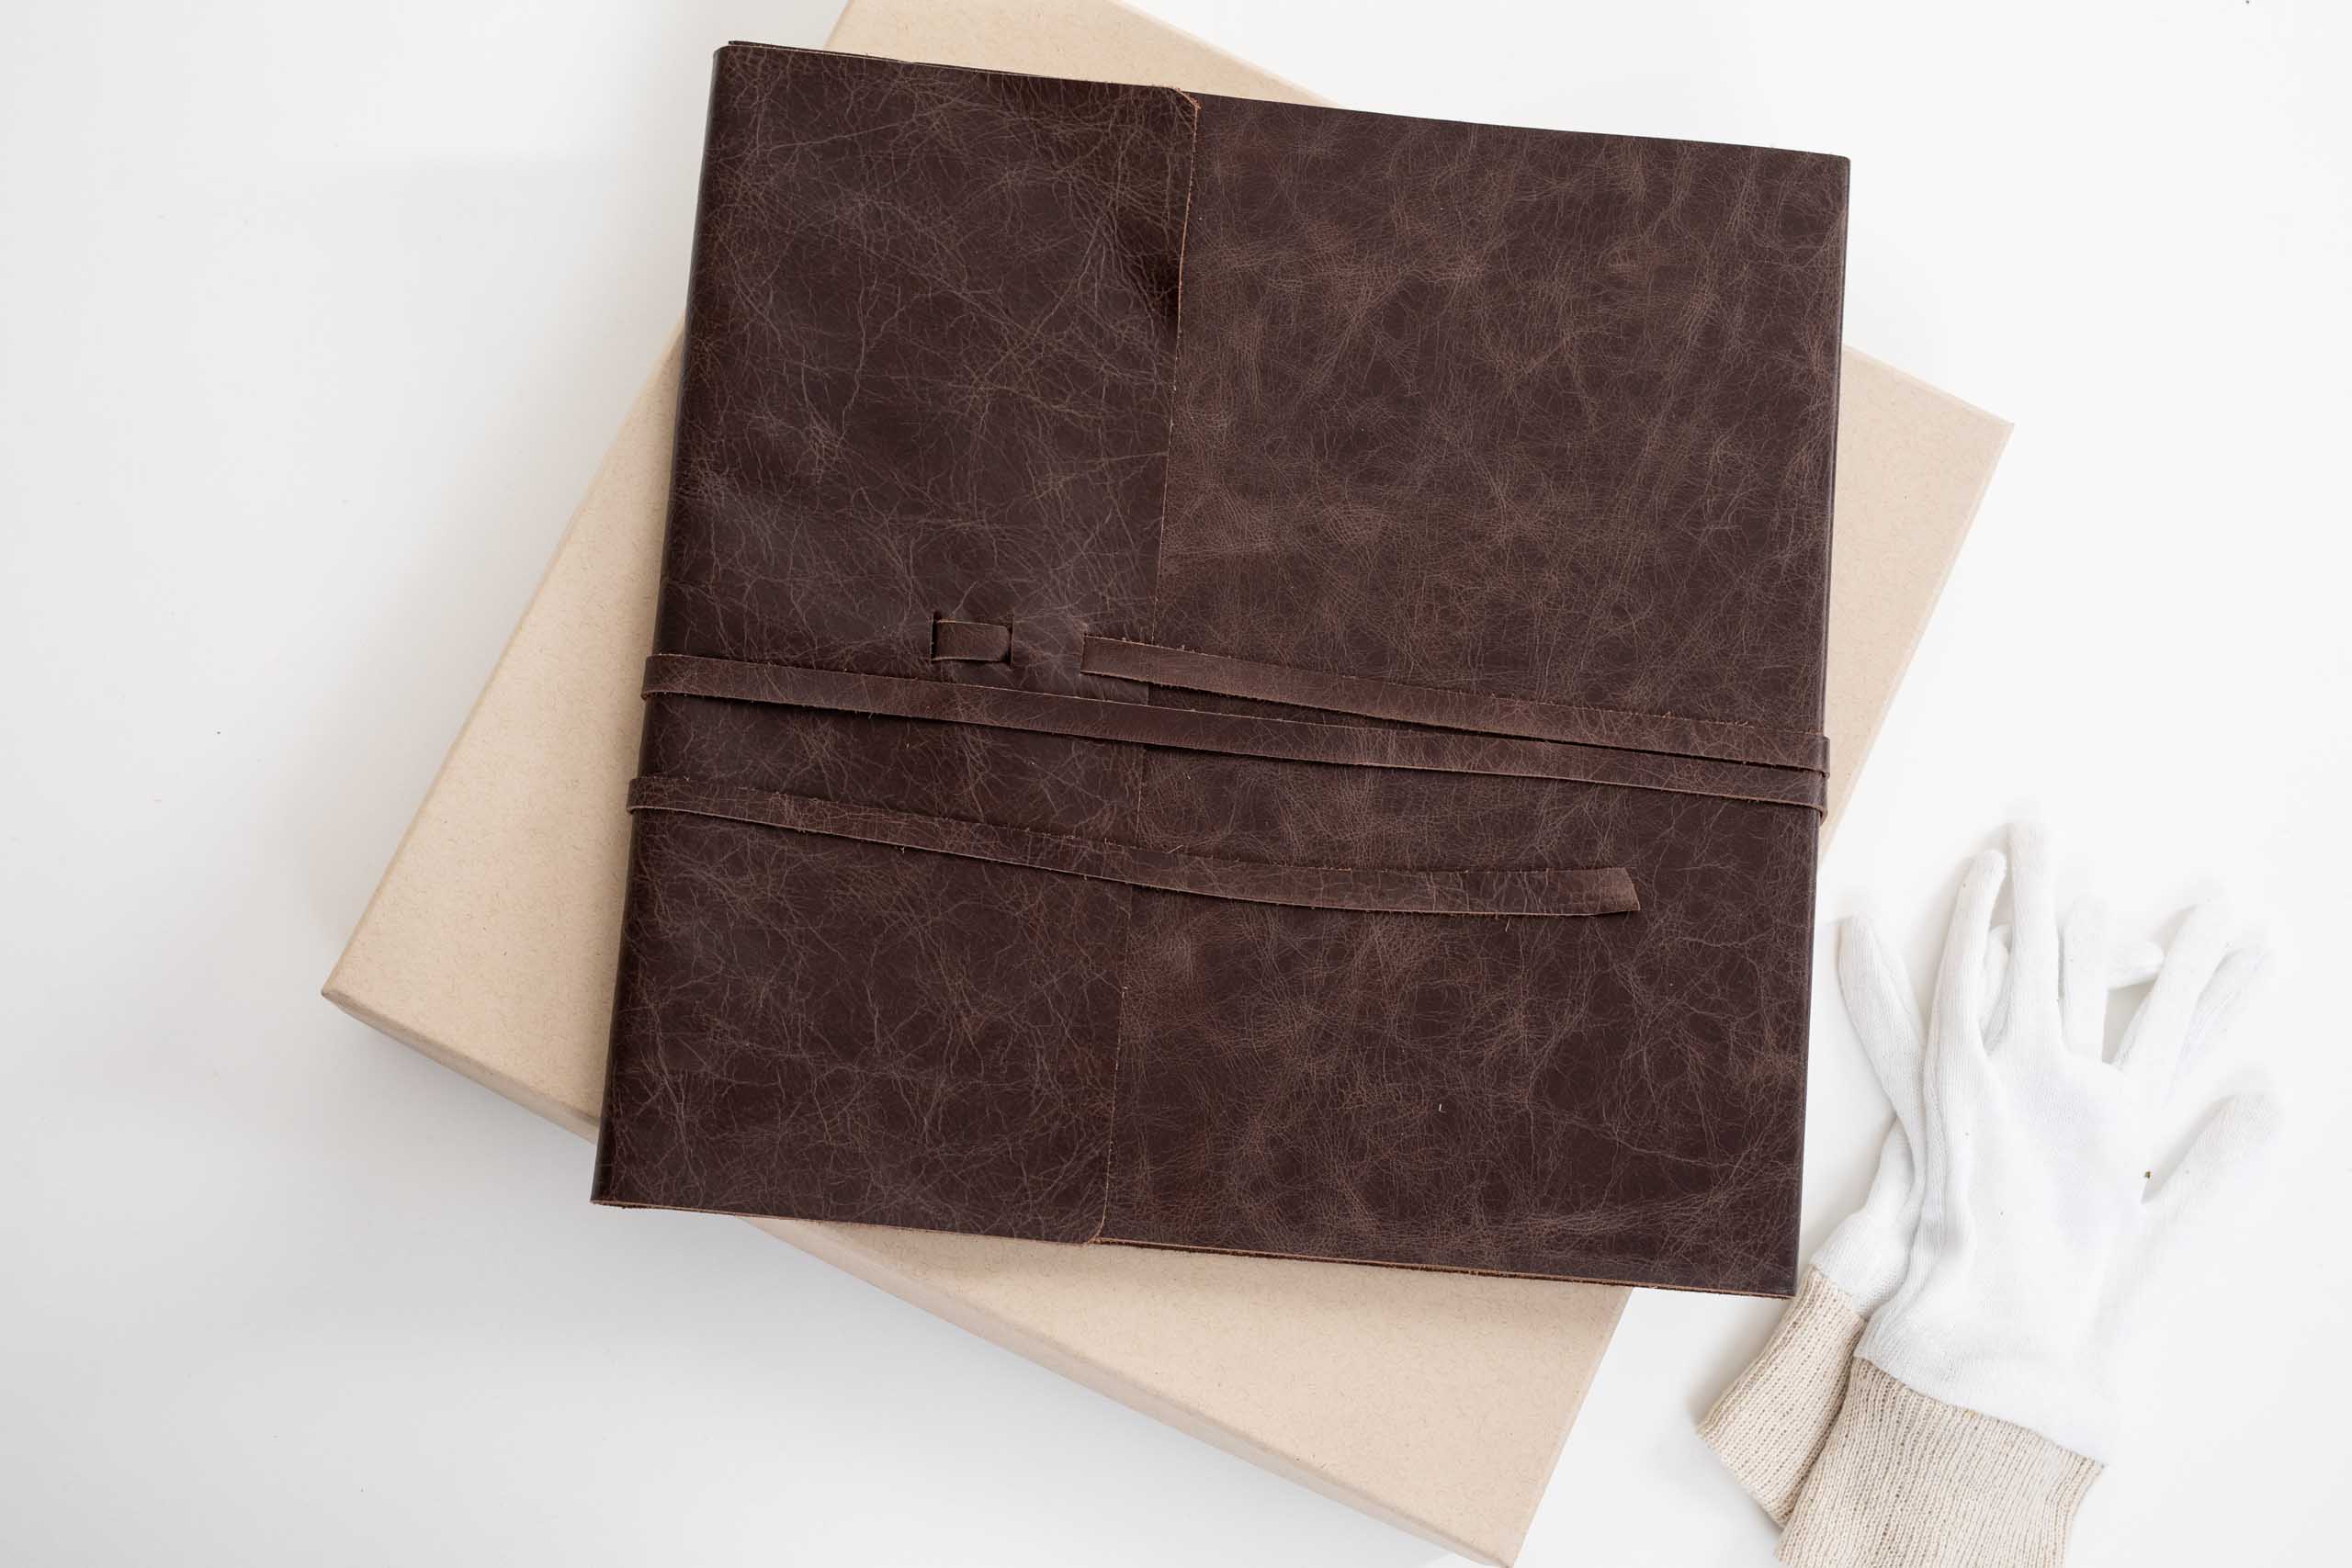 brown leather album, with white gloves